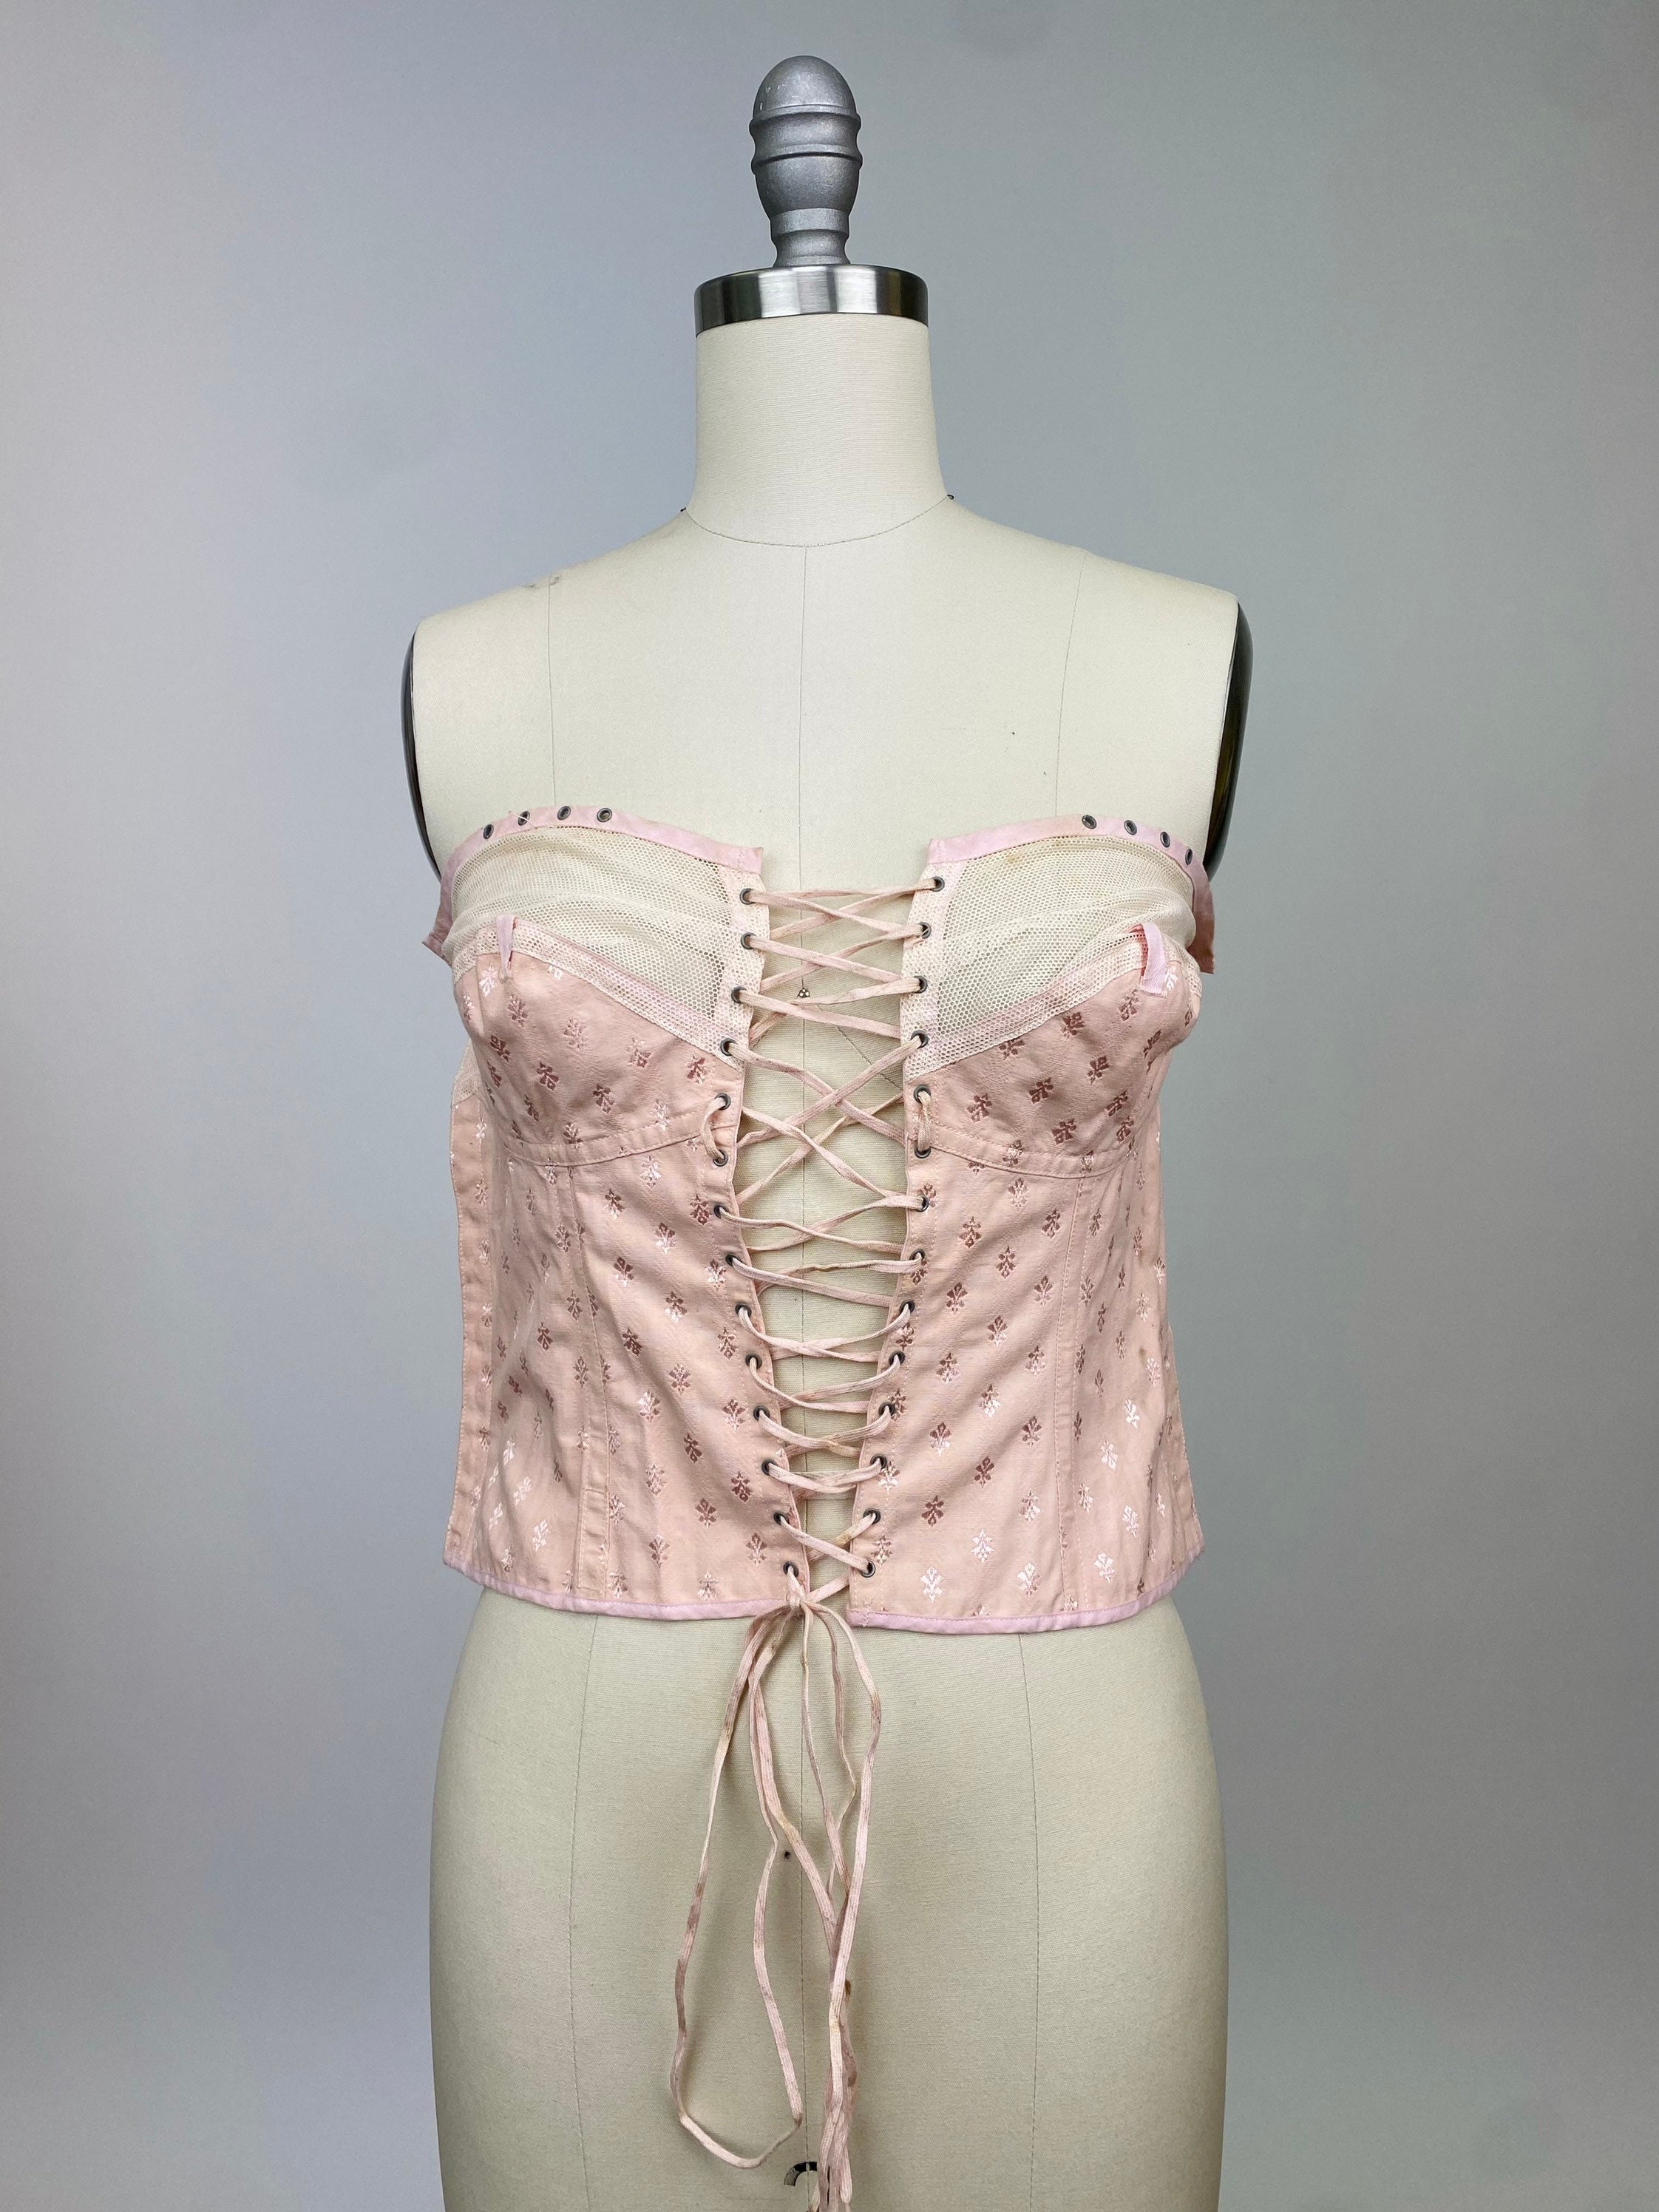 Rare Vintage Early 1900s Spirella Corset, Bustier, Lace up